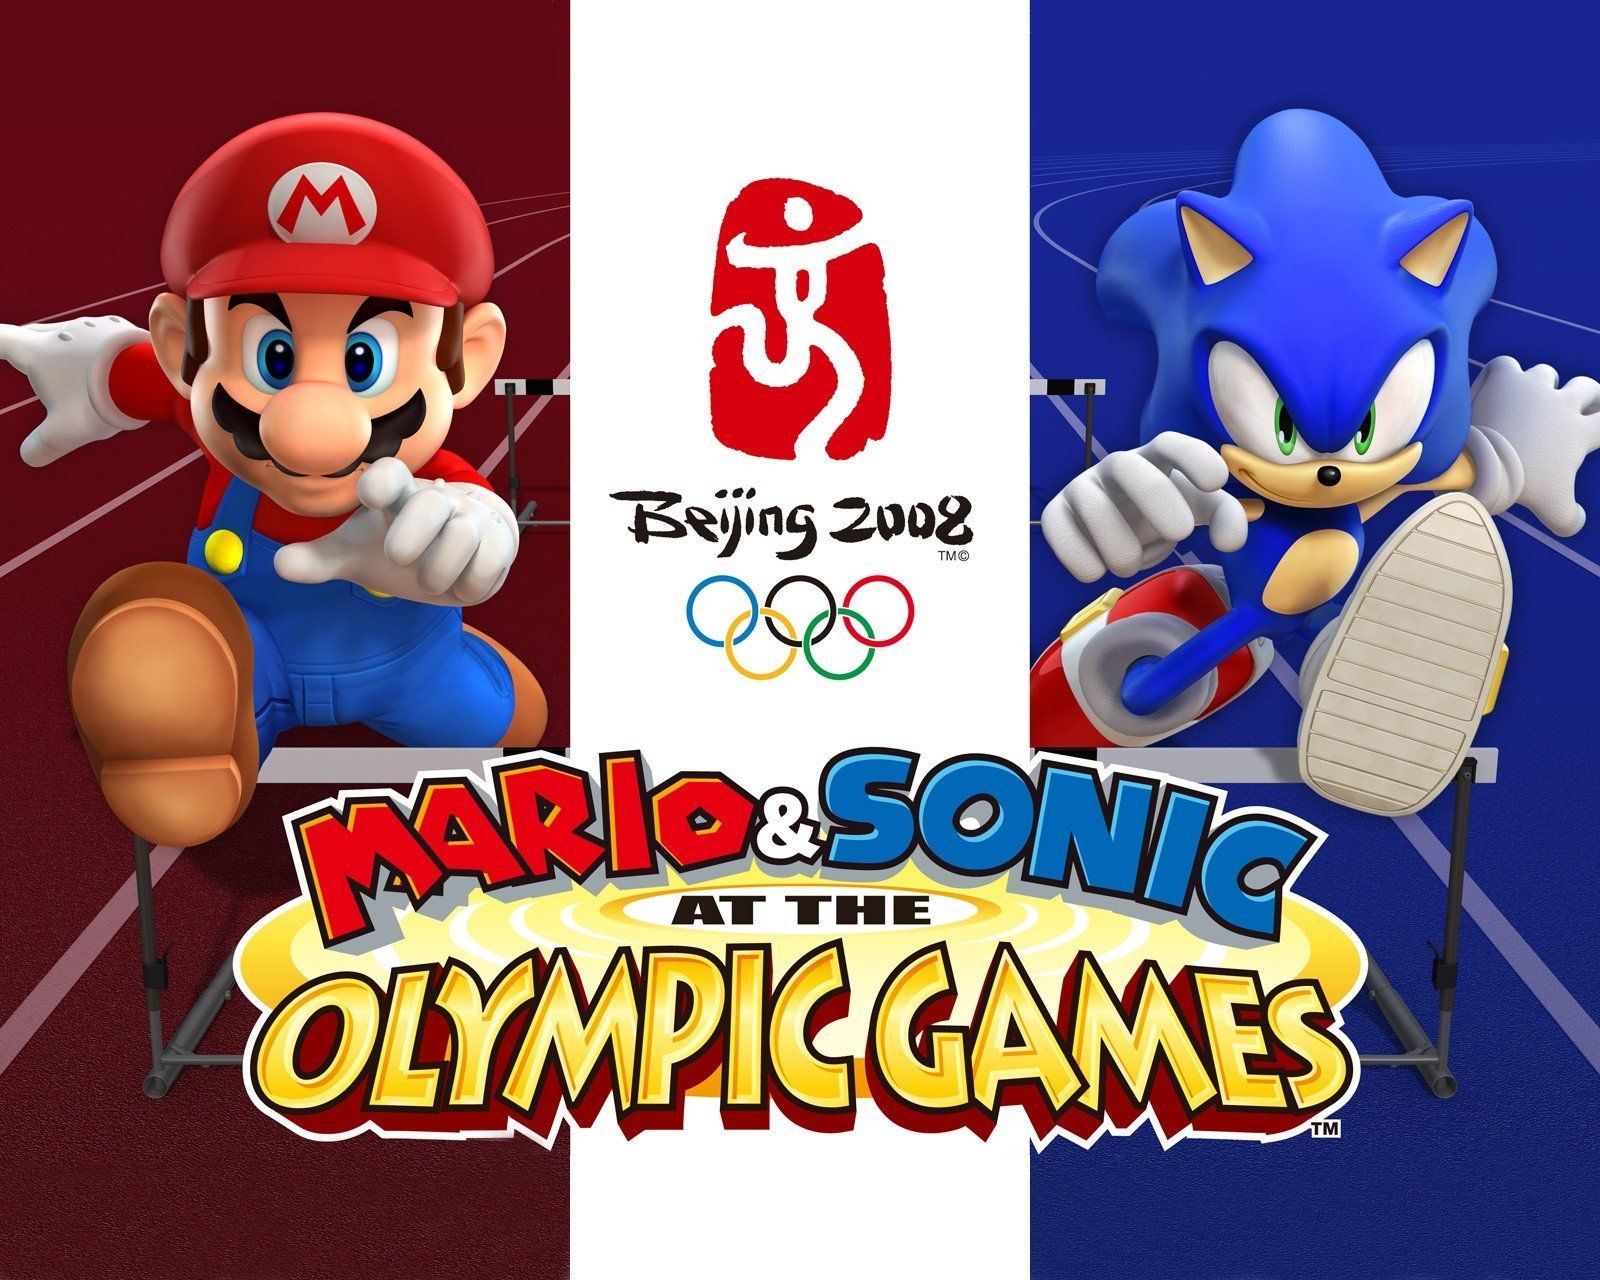 Mario & Sonic at the Olympic Games HD Wallpaper. Background